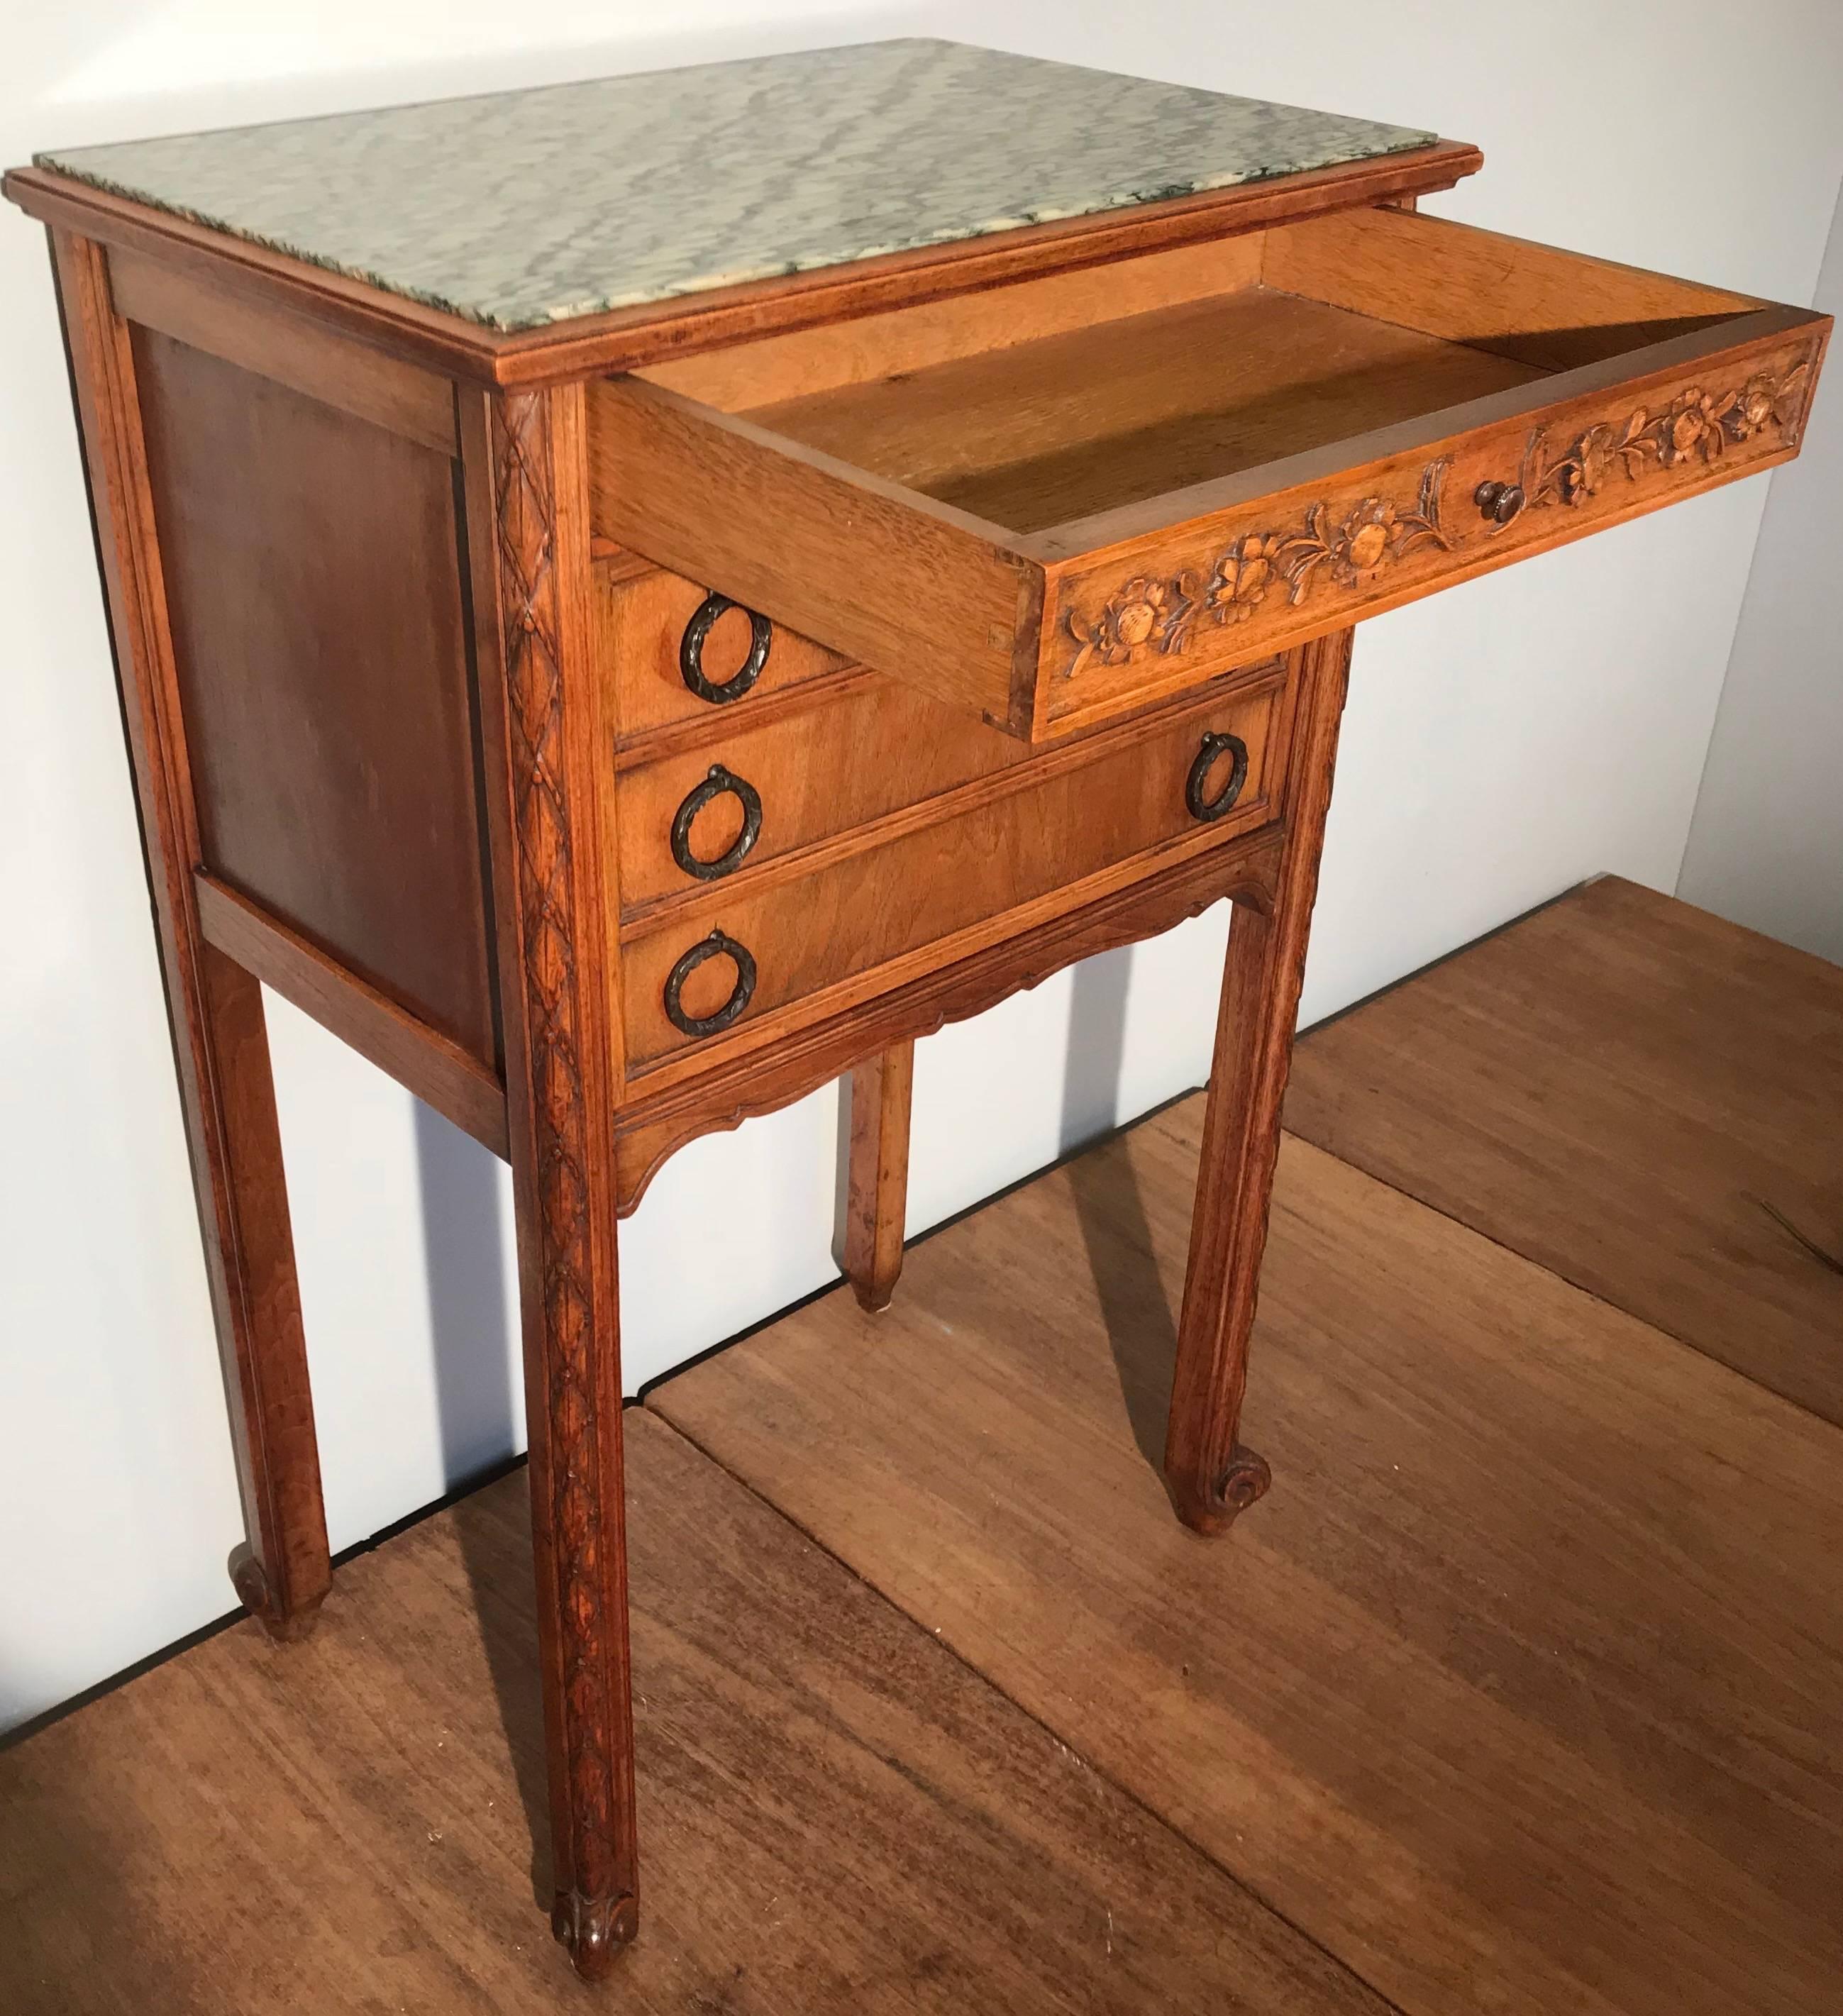 1900s French Hand-Carved Nutwood Side Table / Cabinet with Marble Top & Interior 2